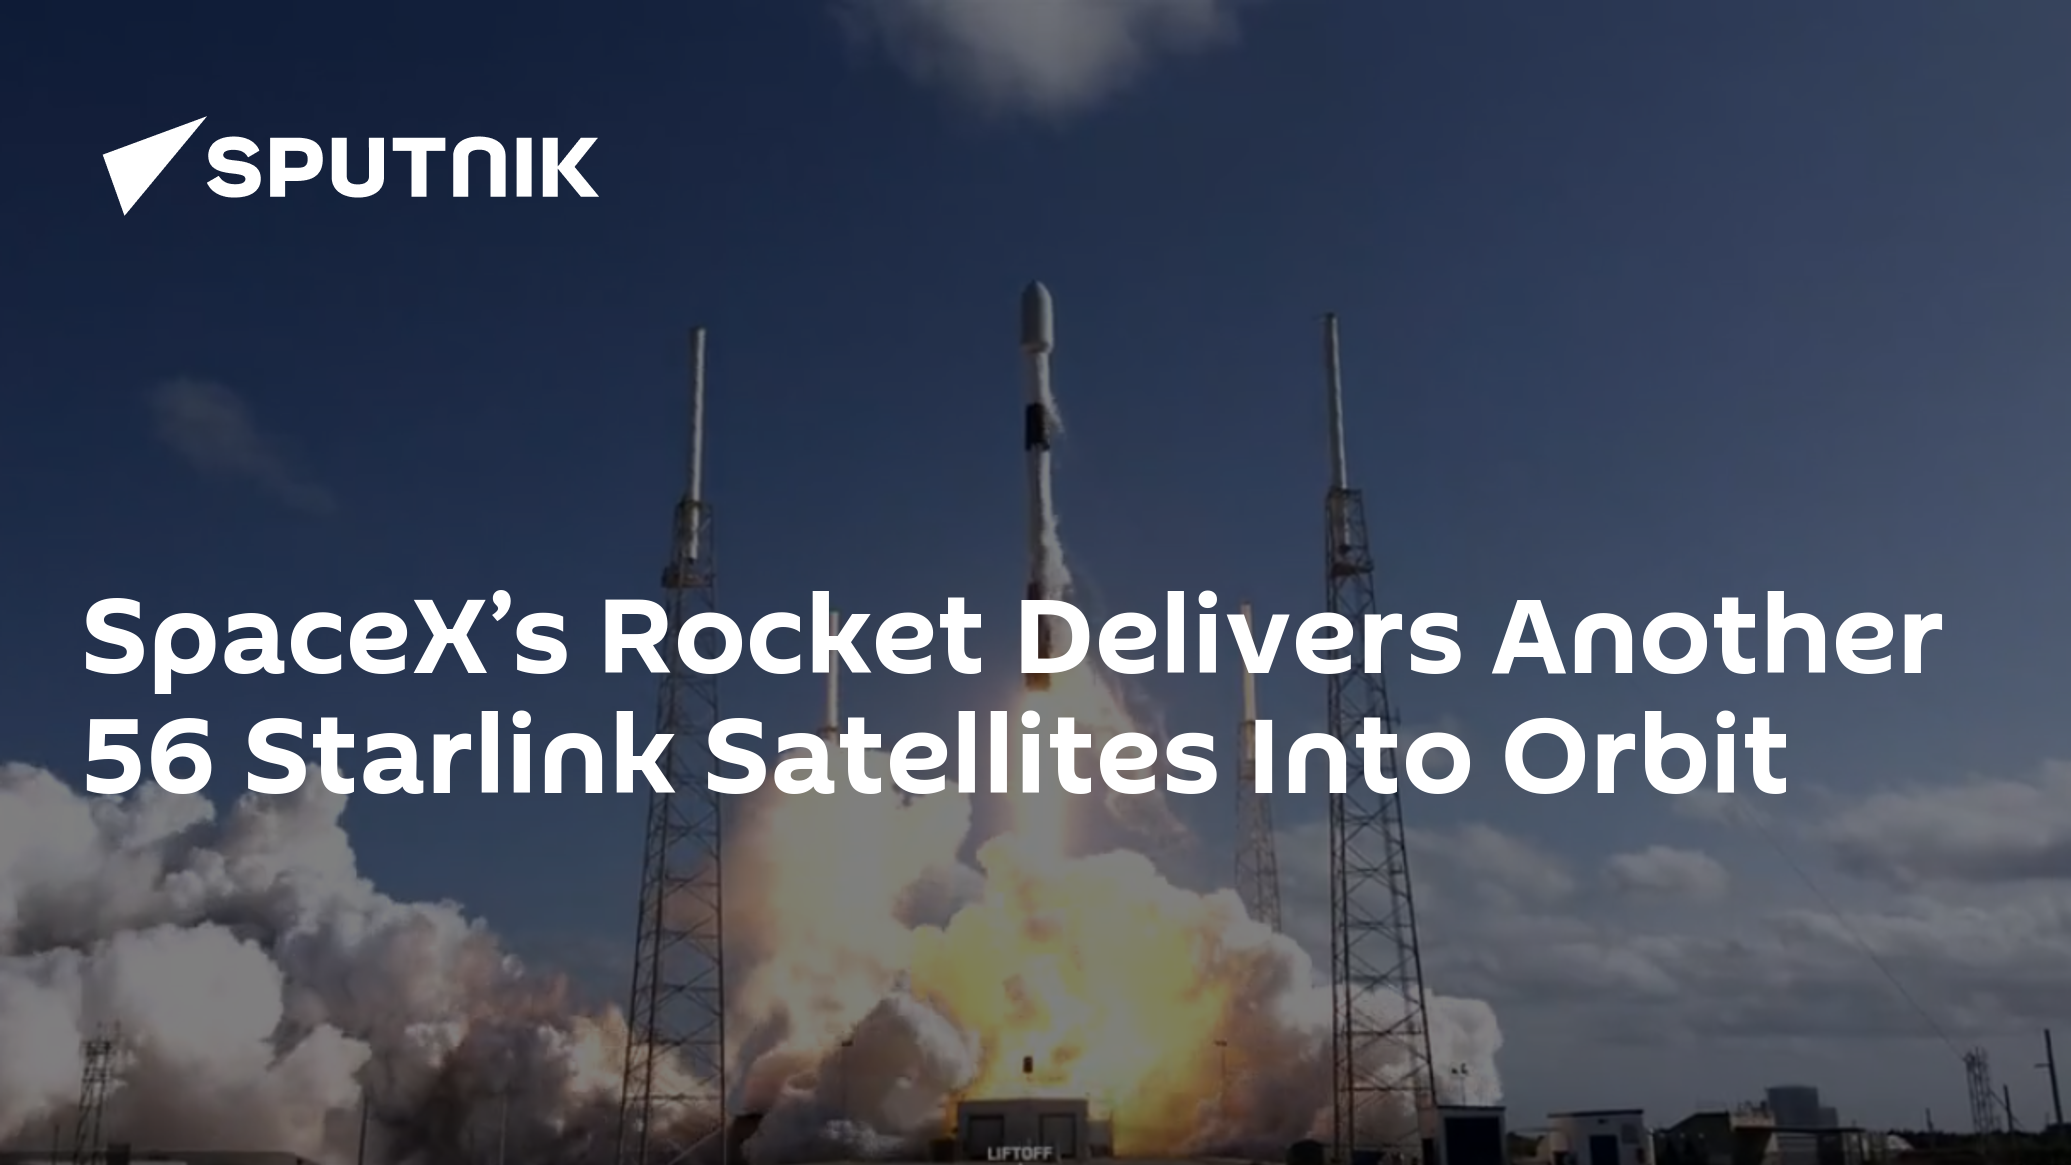 SpaceX’s Rocket Delivers Another 56 Starlink Satellites Into Orbit